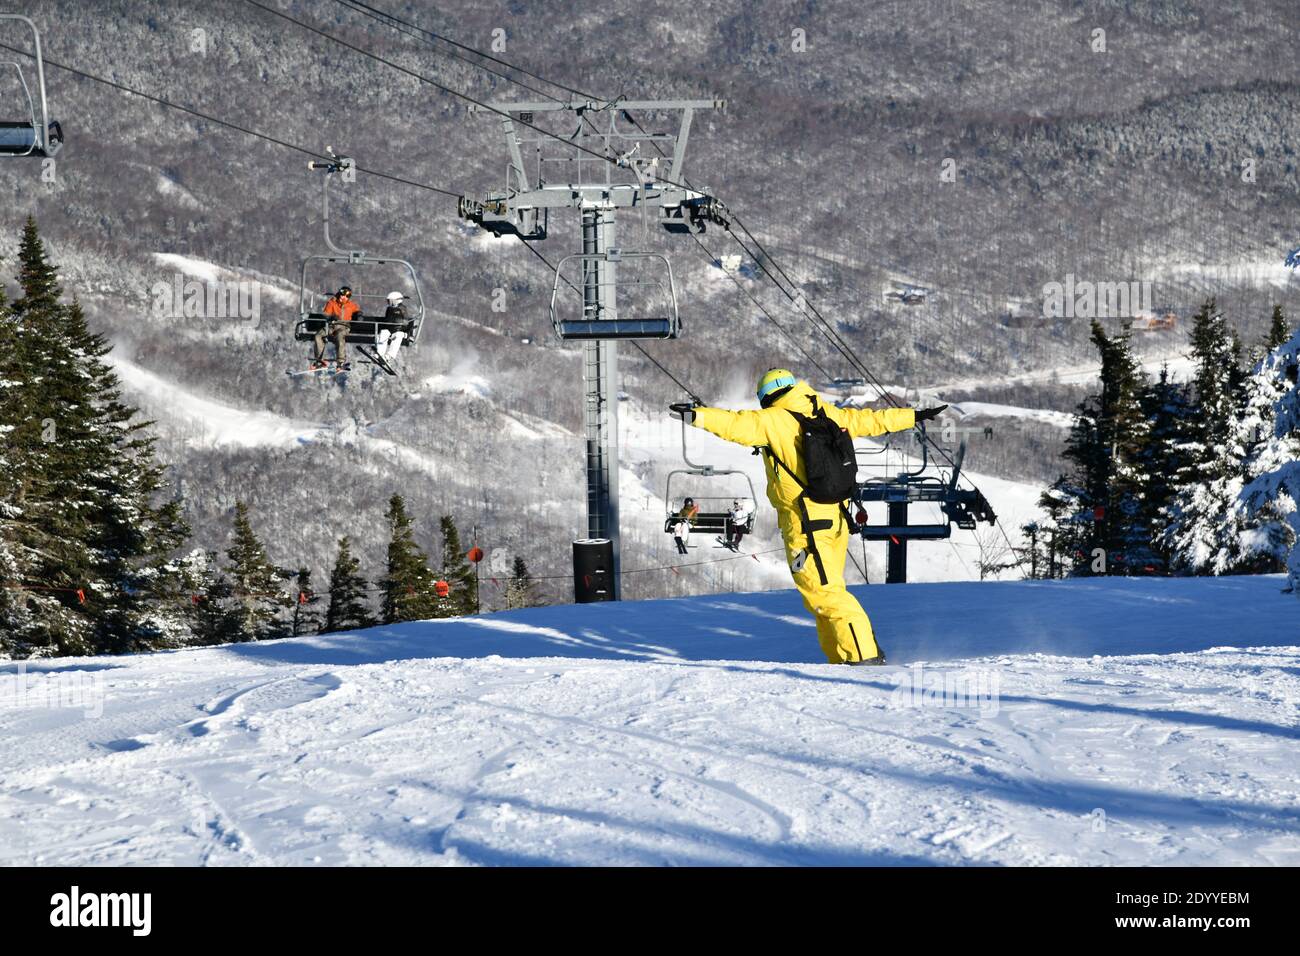 Snowboarder riding down the slopes wearing yellow mono suit on sunny day with fresh snow. Stowe mountain ski resort, VT 2020. Hi resolution image Stock Photo